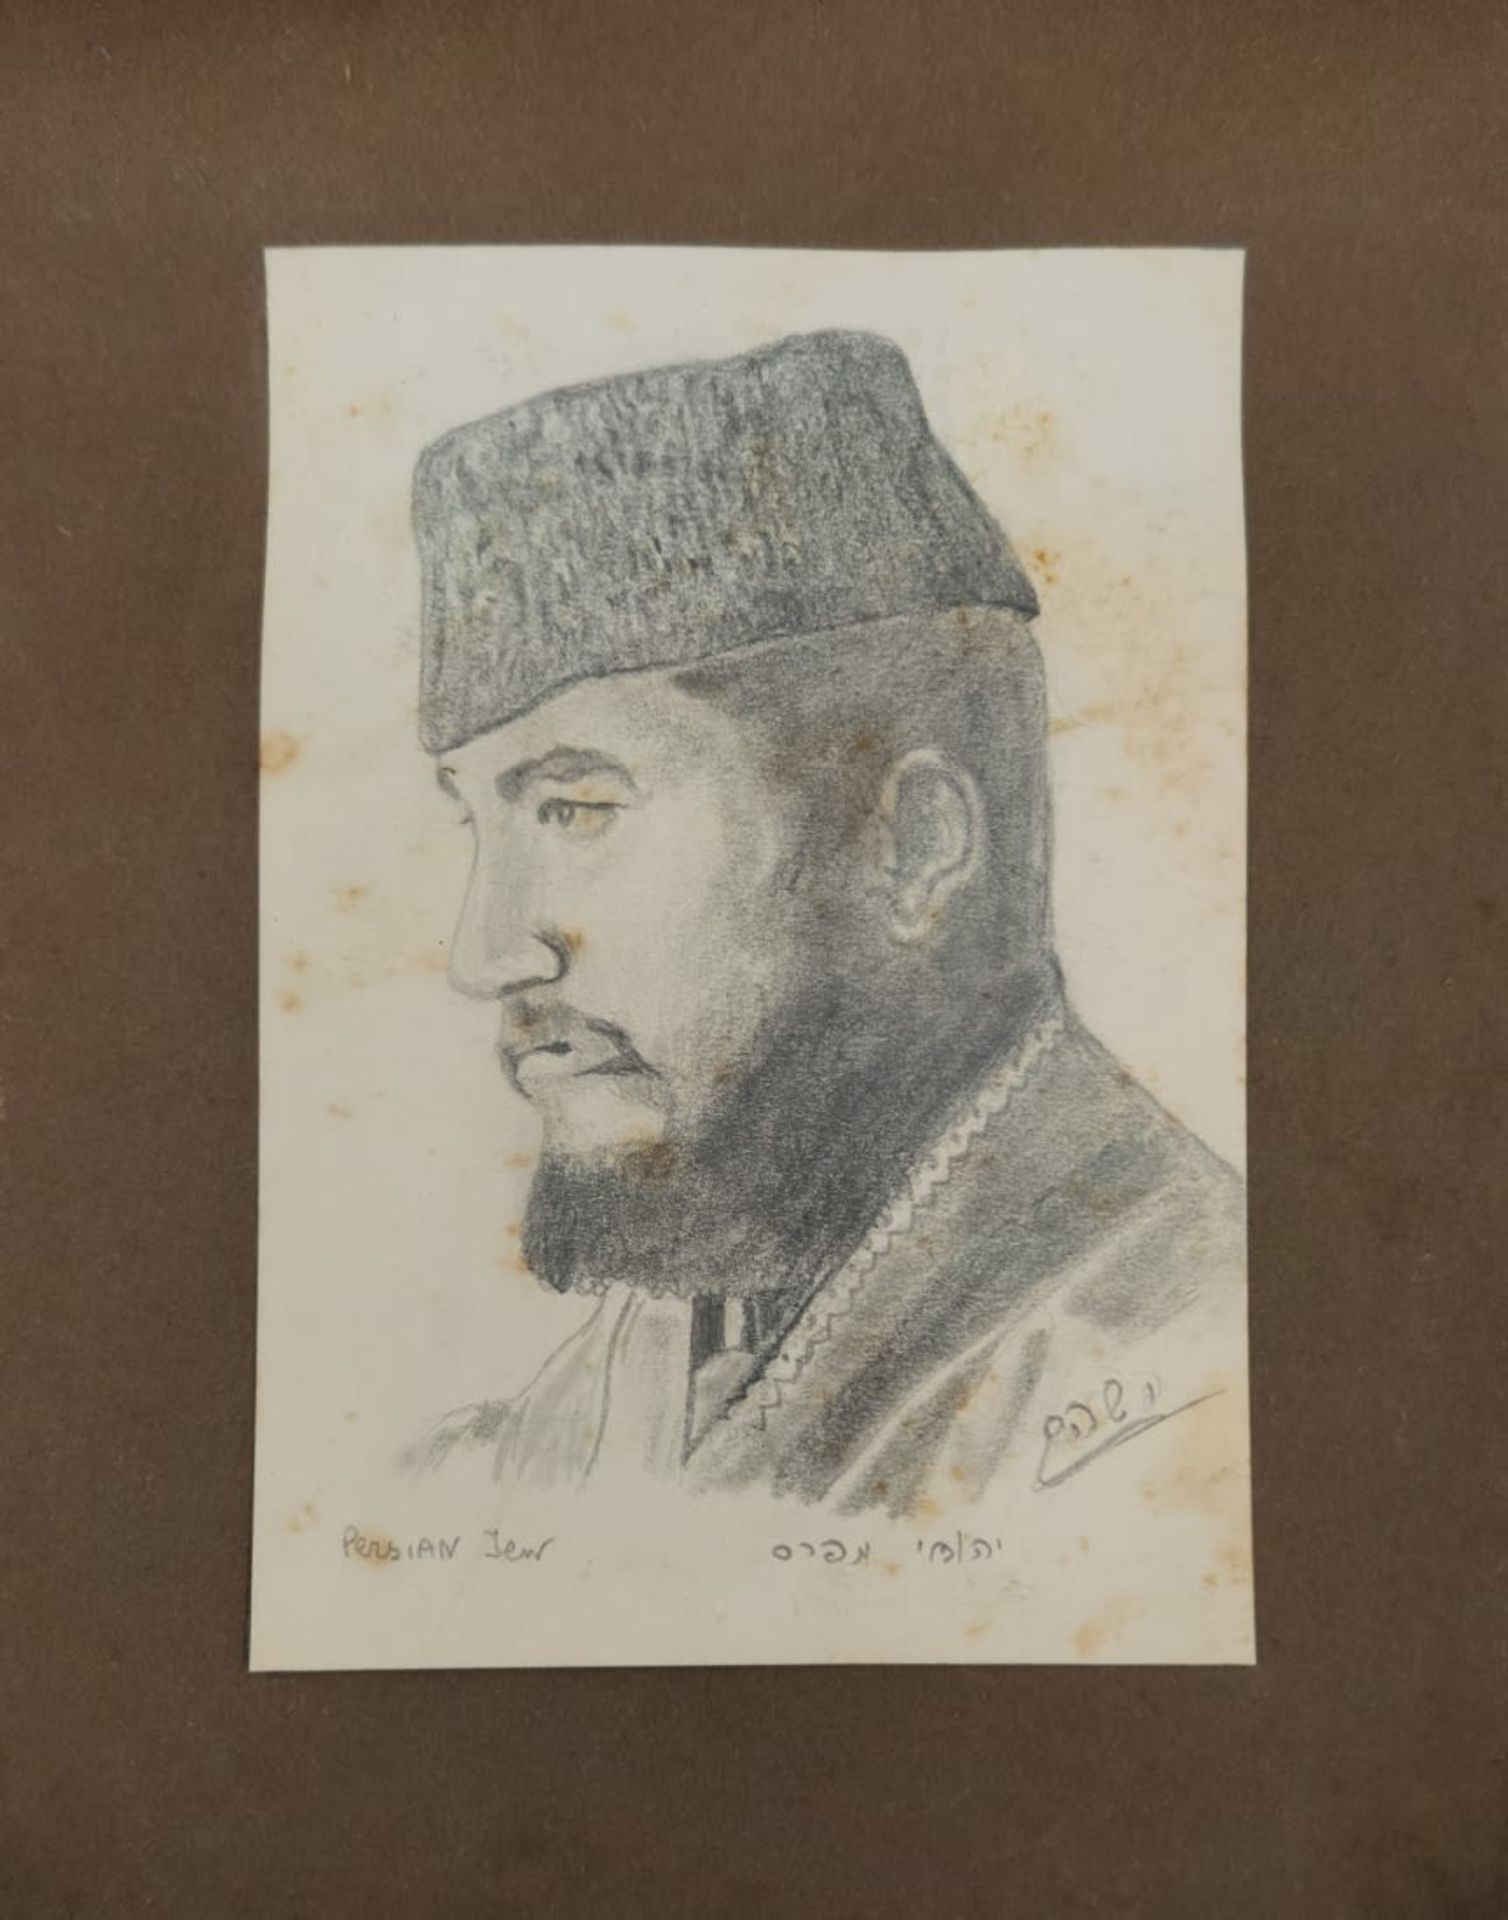 11 drawings of Jewish man, J. Shoham, pencil on paper, some stains, signed: J. Shoham pasted in an - Image 5 of 12